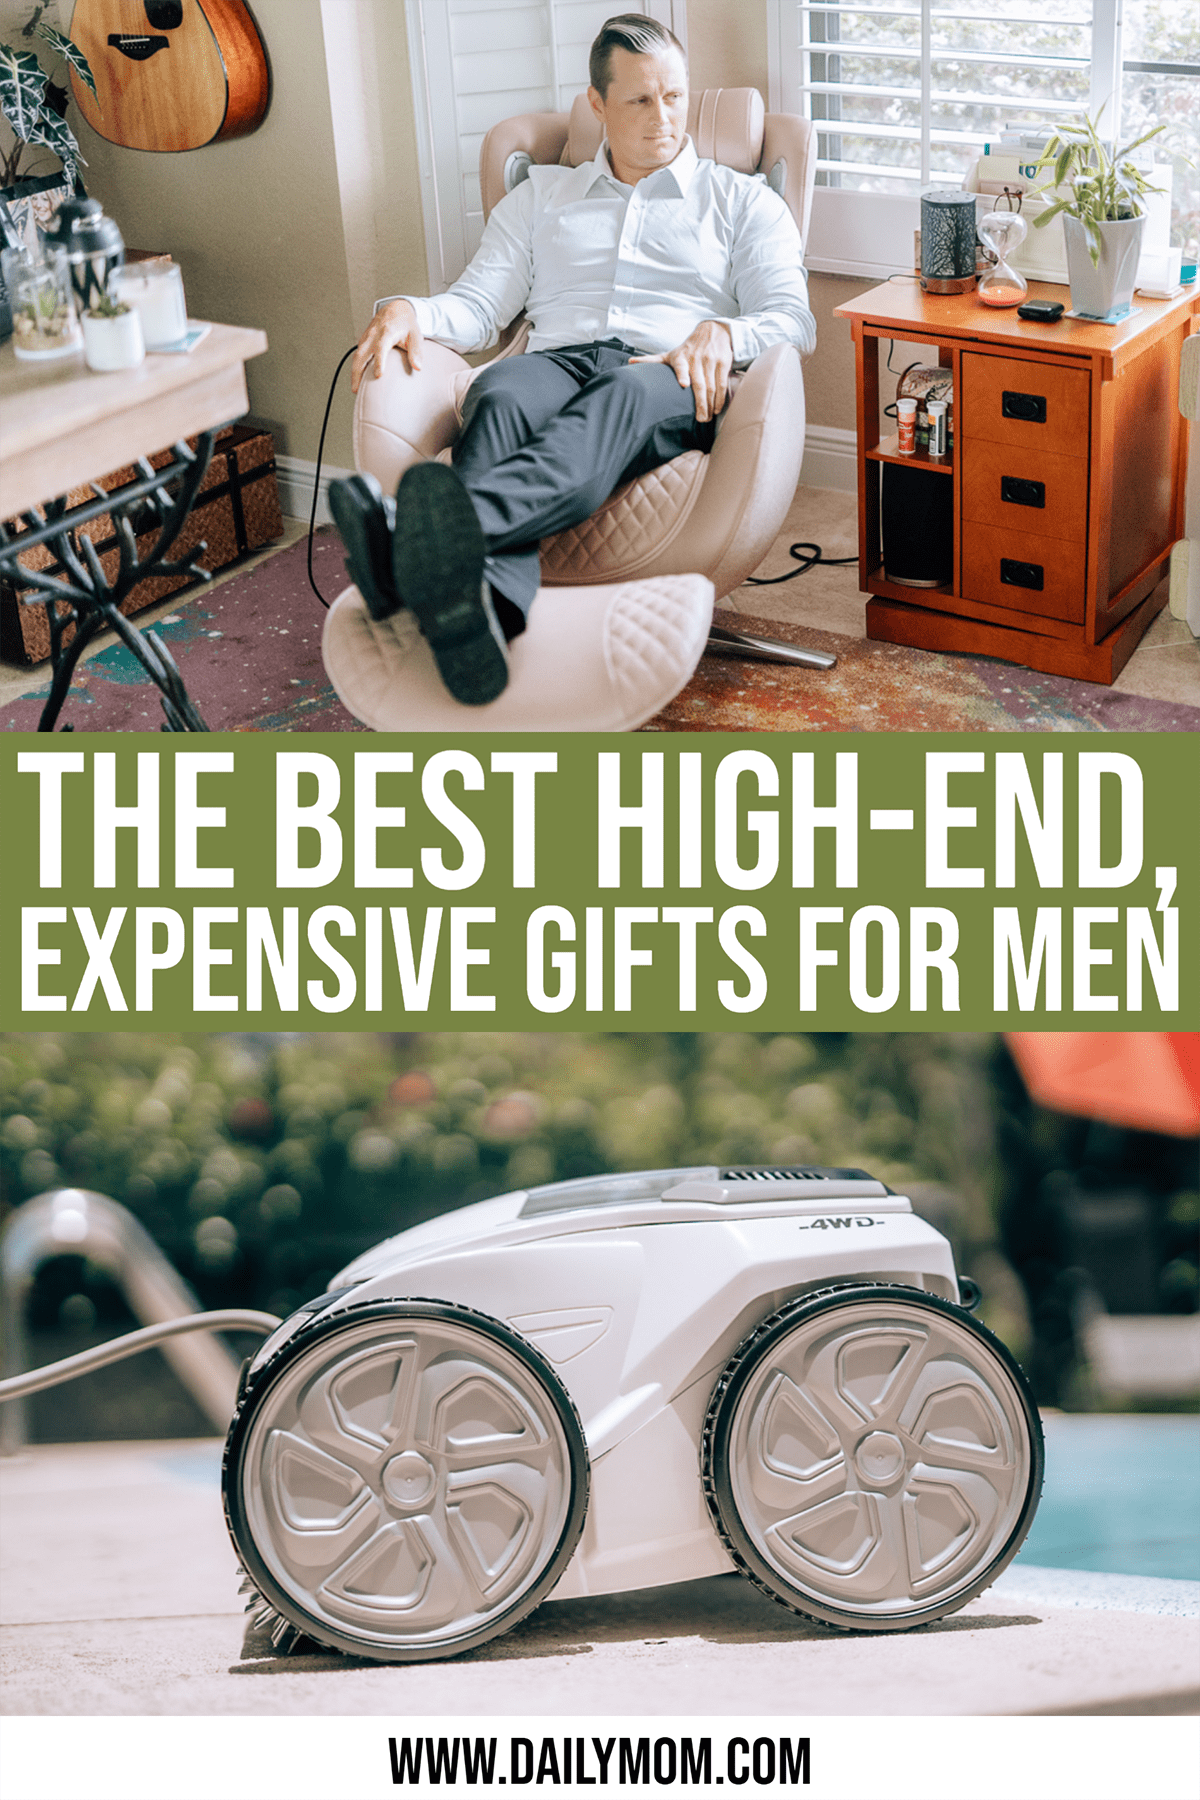 The Best High-End, Expensive Gifts For Men